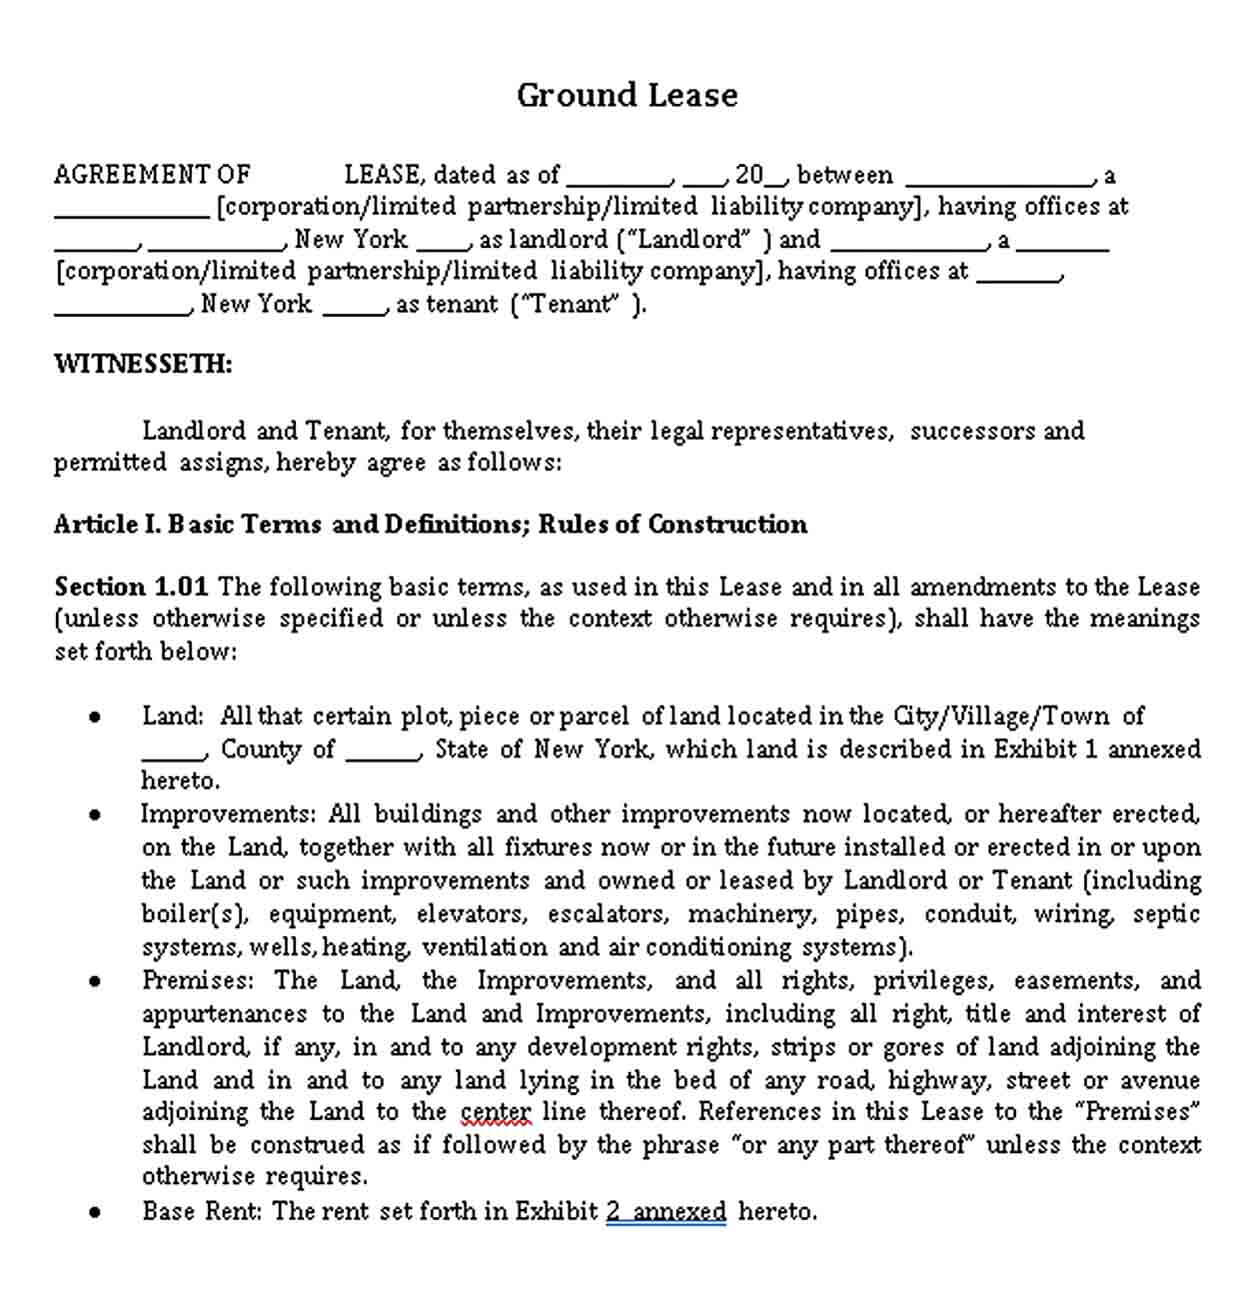 Sample Ground Lease form